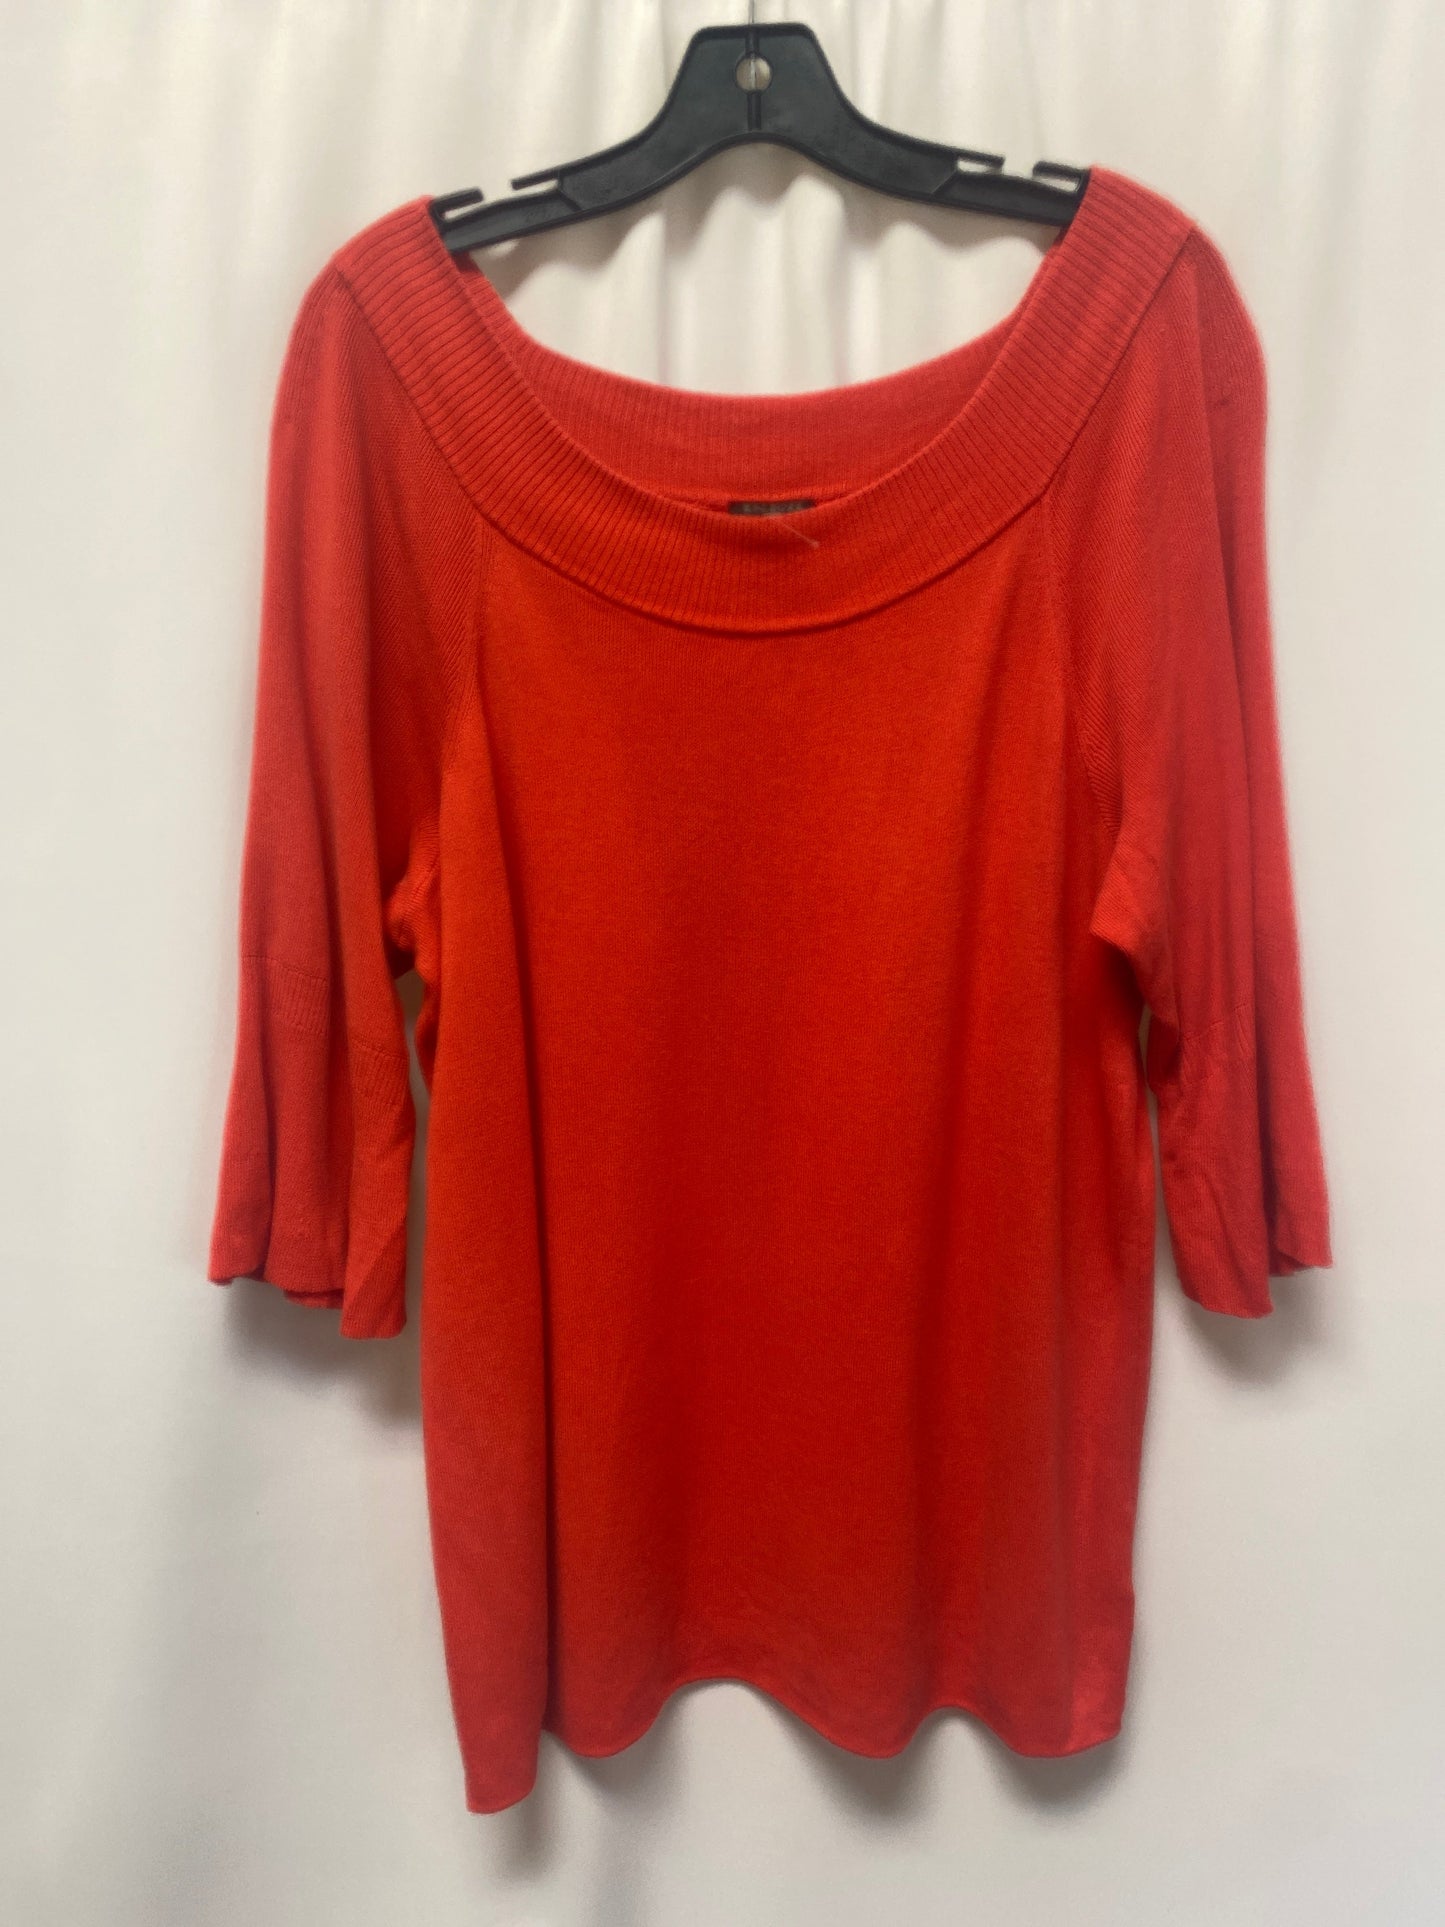 Red Top 3/4 Sleeve Talbots, Size 1x